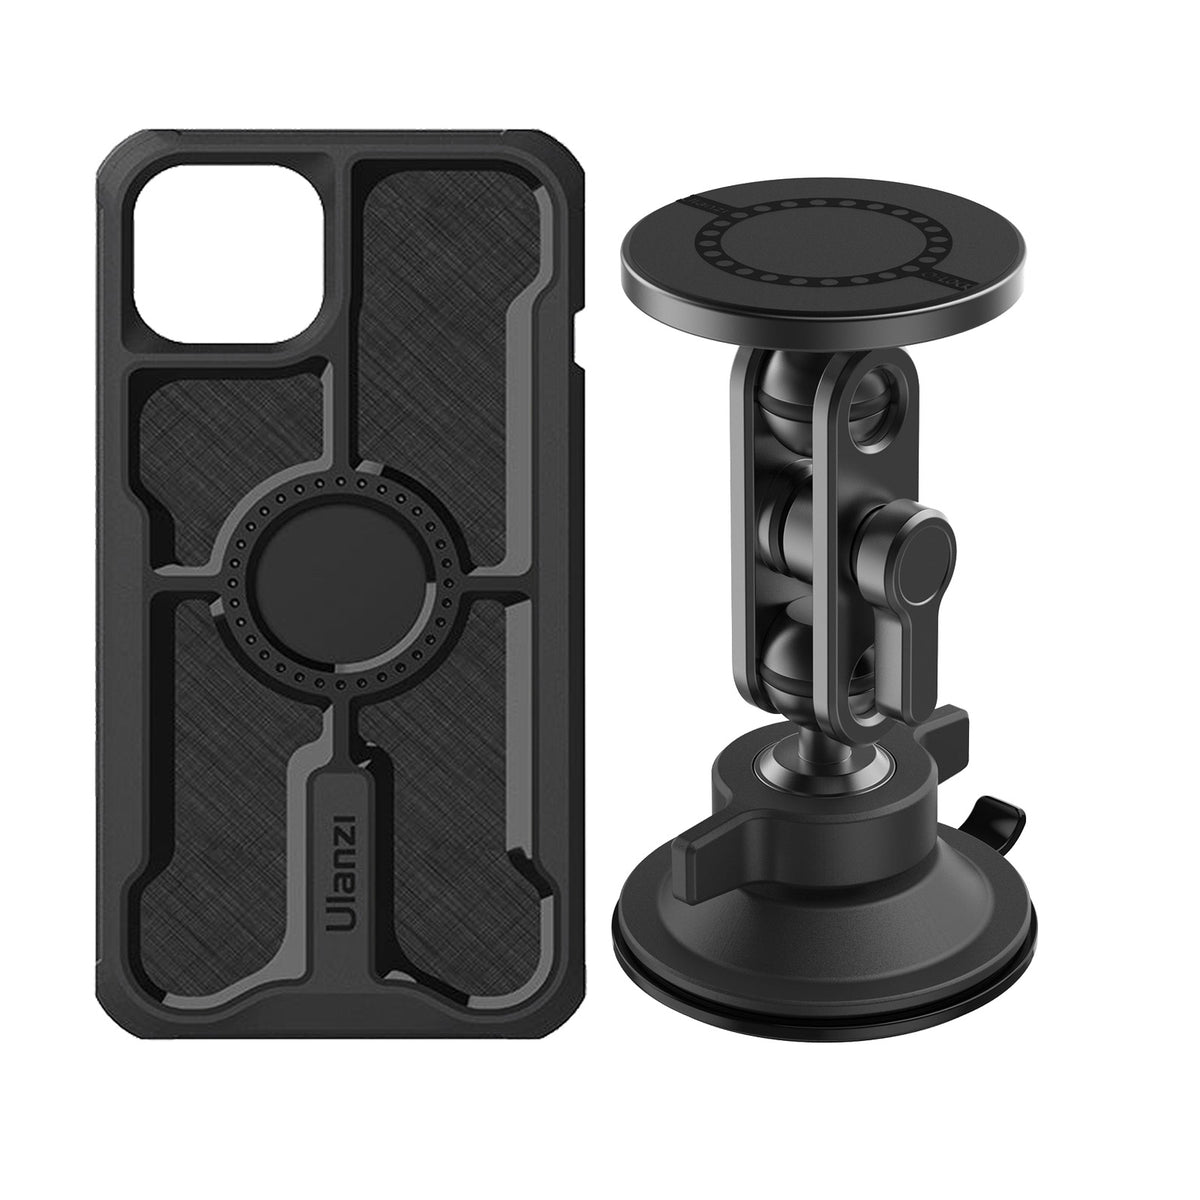 Ulanzi O-LOCK iPhone Quick Release Kit for Car